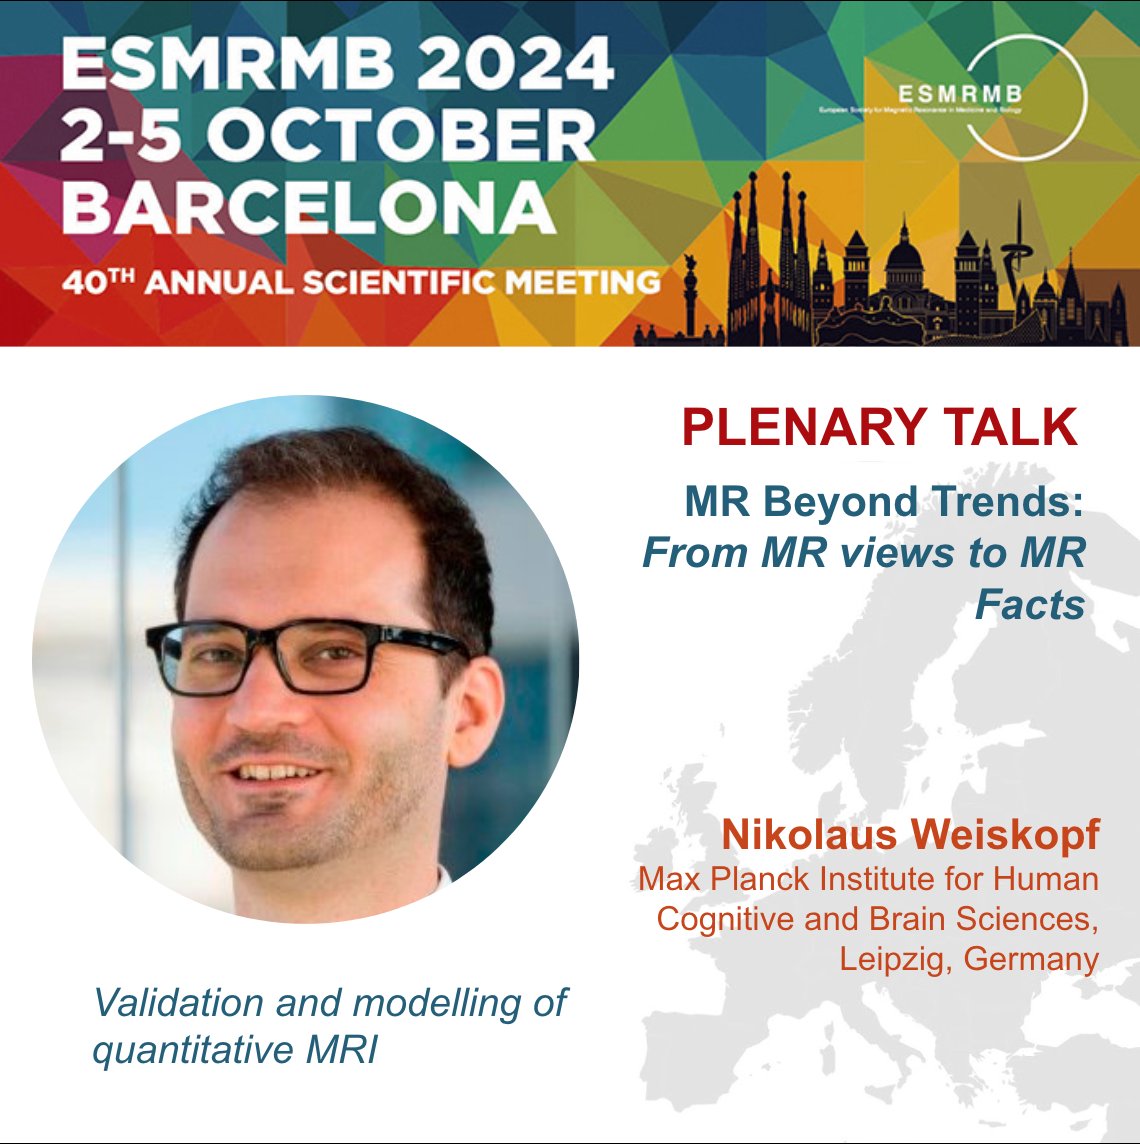 Here is another reason to submit an abstract and attend #ESMRMB2024!

⭐Plenary Talk⭐

'Validation and modelling of quantitative MRI'

📢 by Nikolaus Weiskopf from @MPI_CBS

➡️ Focus Topic: MR Beyond Trends
▶️ Plenary Session: From MR views to MR facts

#ESMRMB #MRI #biomarkers